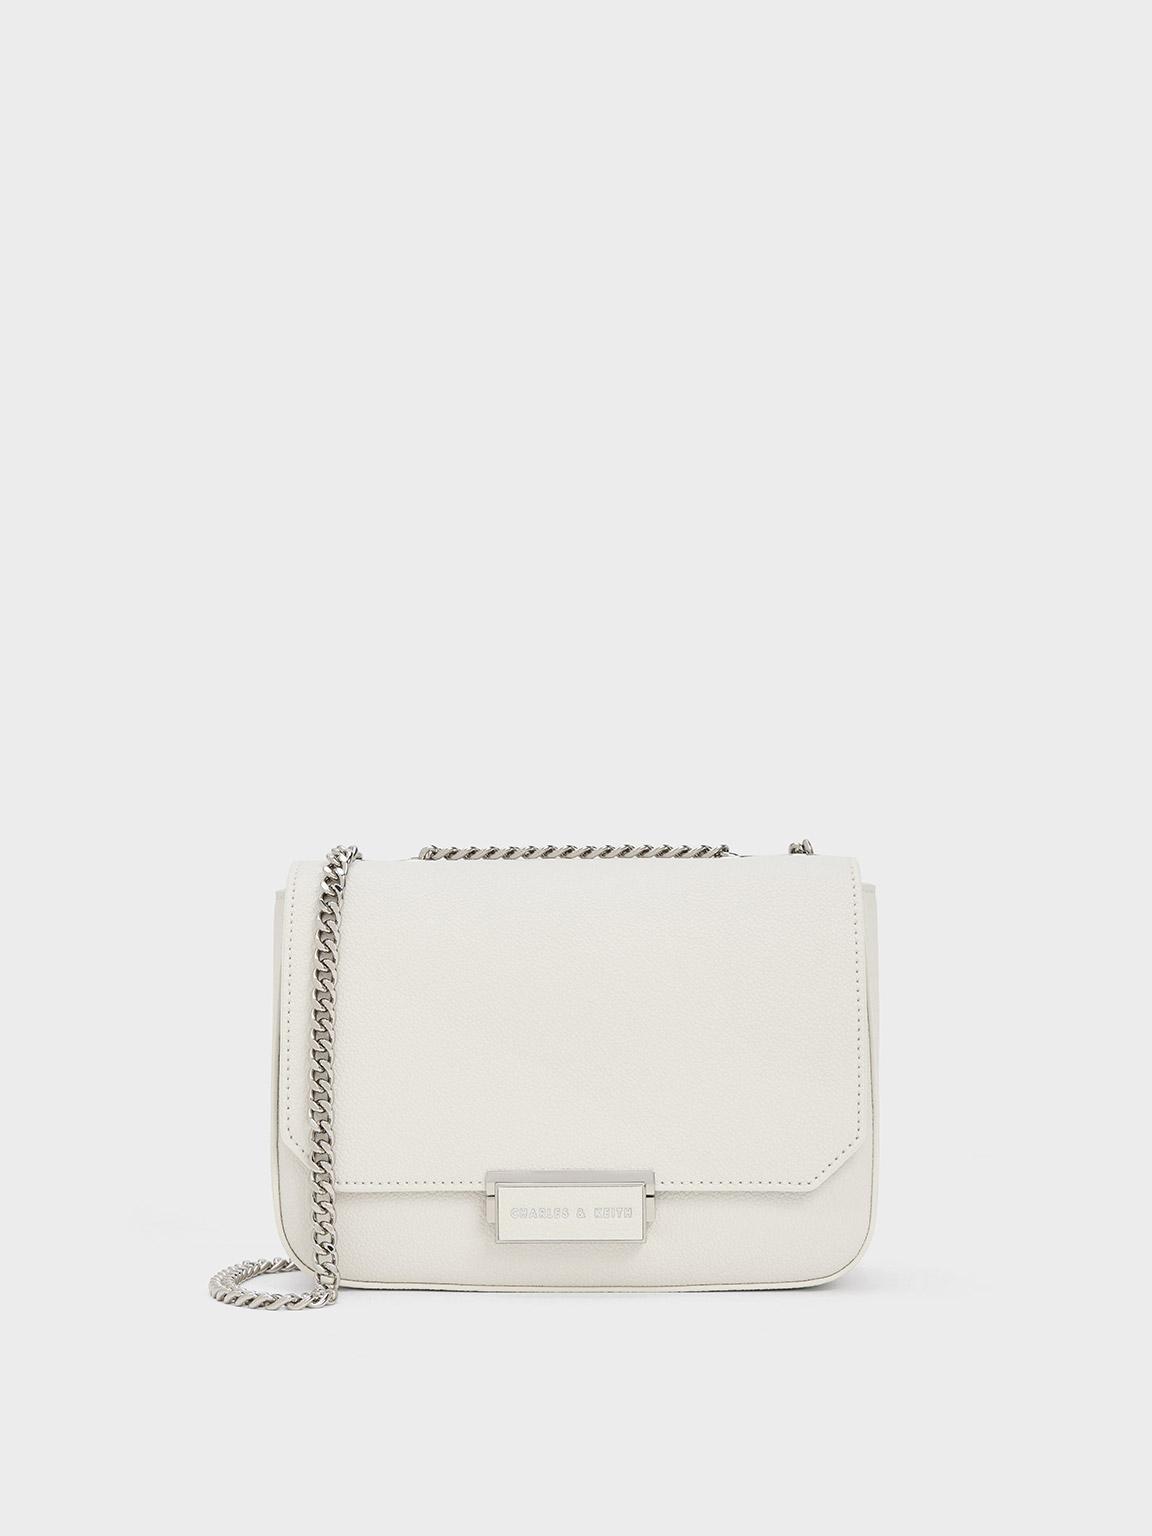 Charles & Keith Xanthe Chunky Chain Shoulder Bag in White